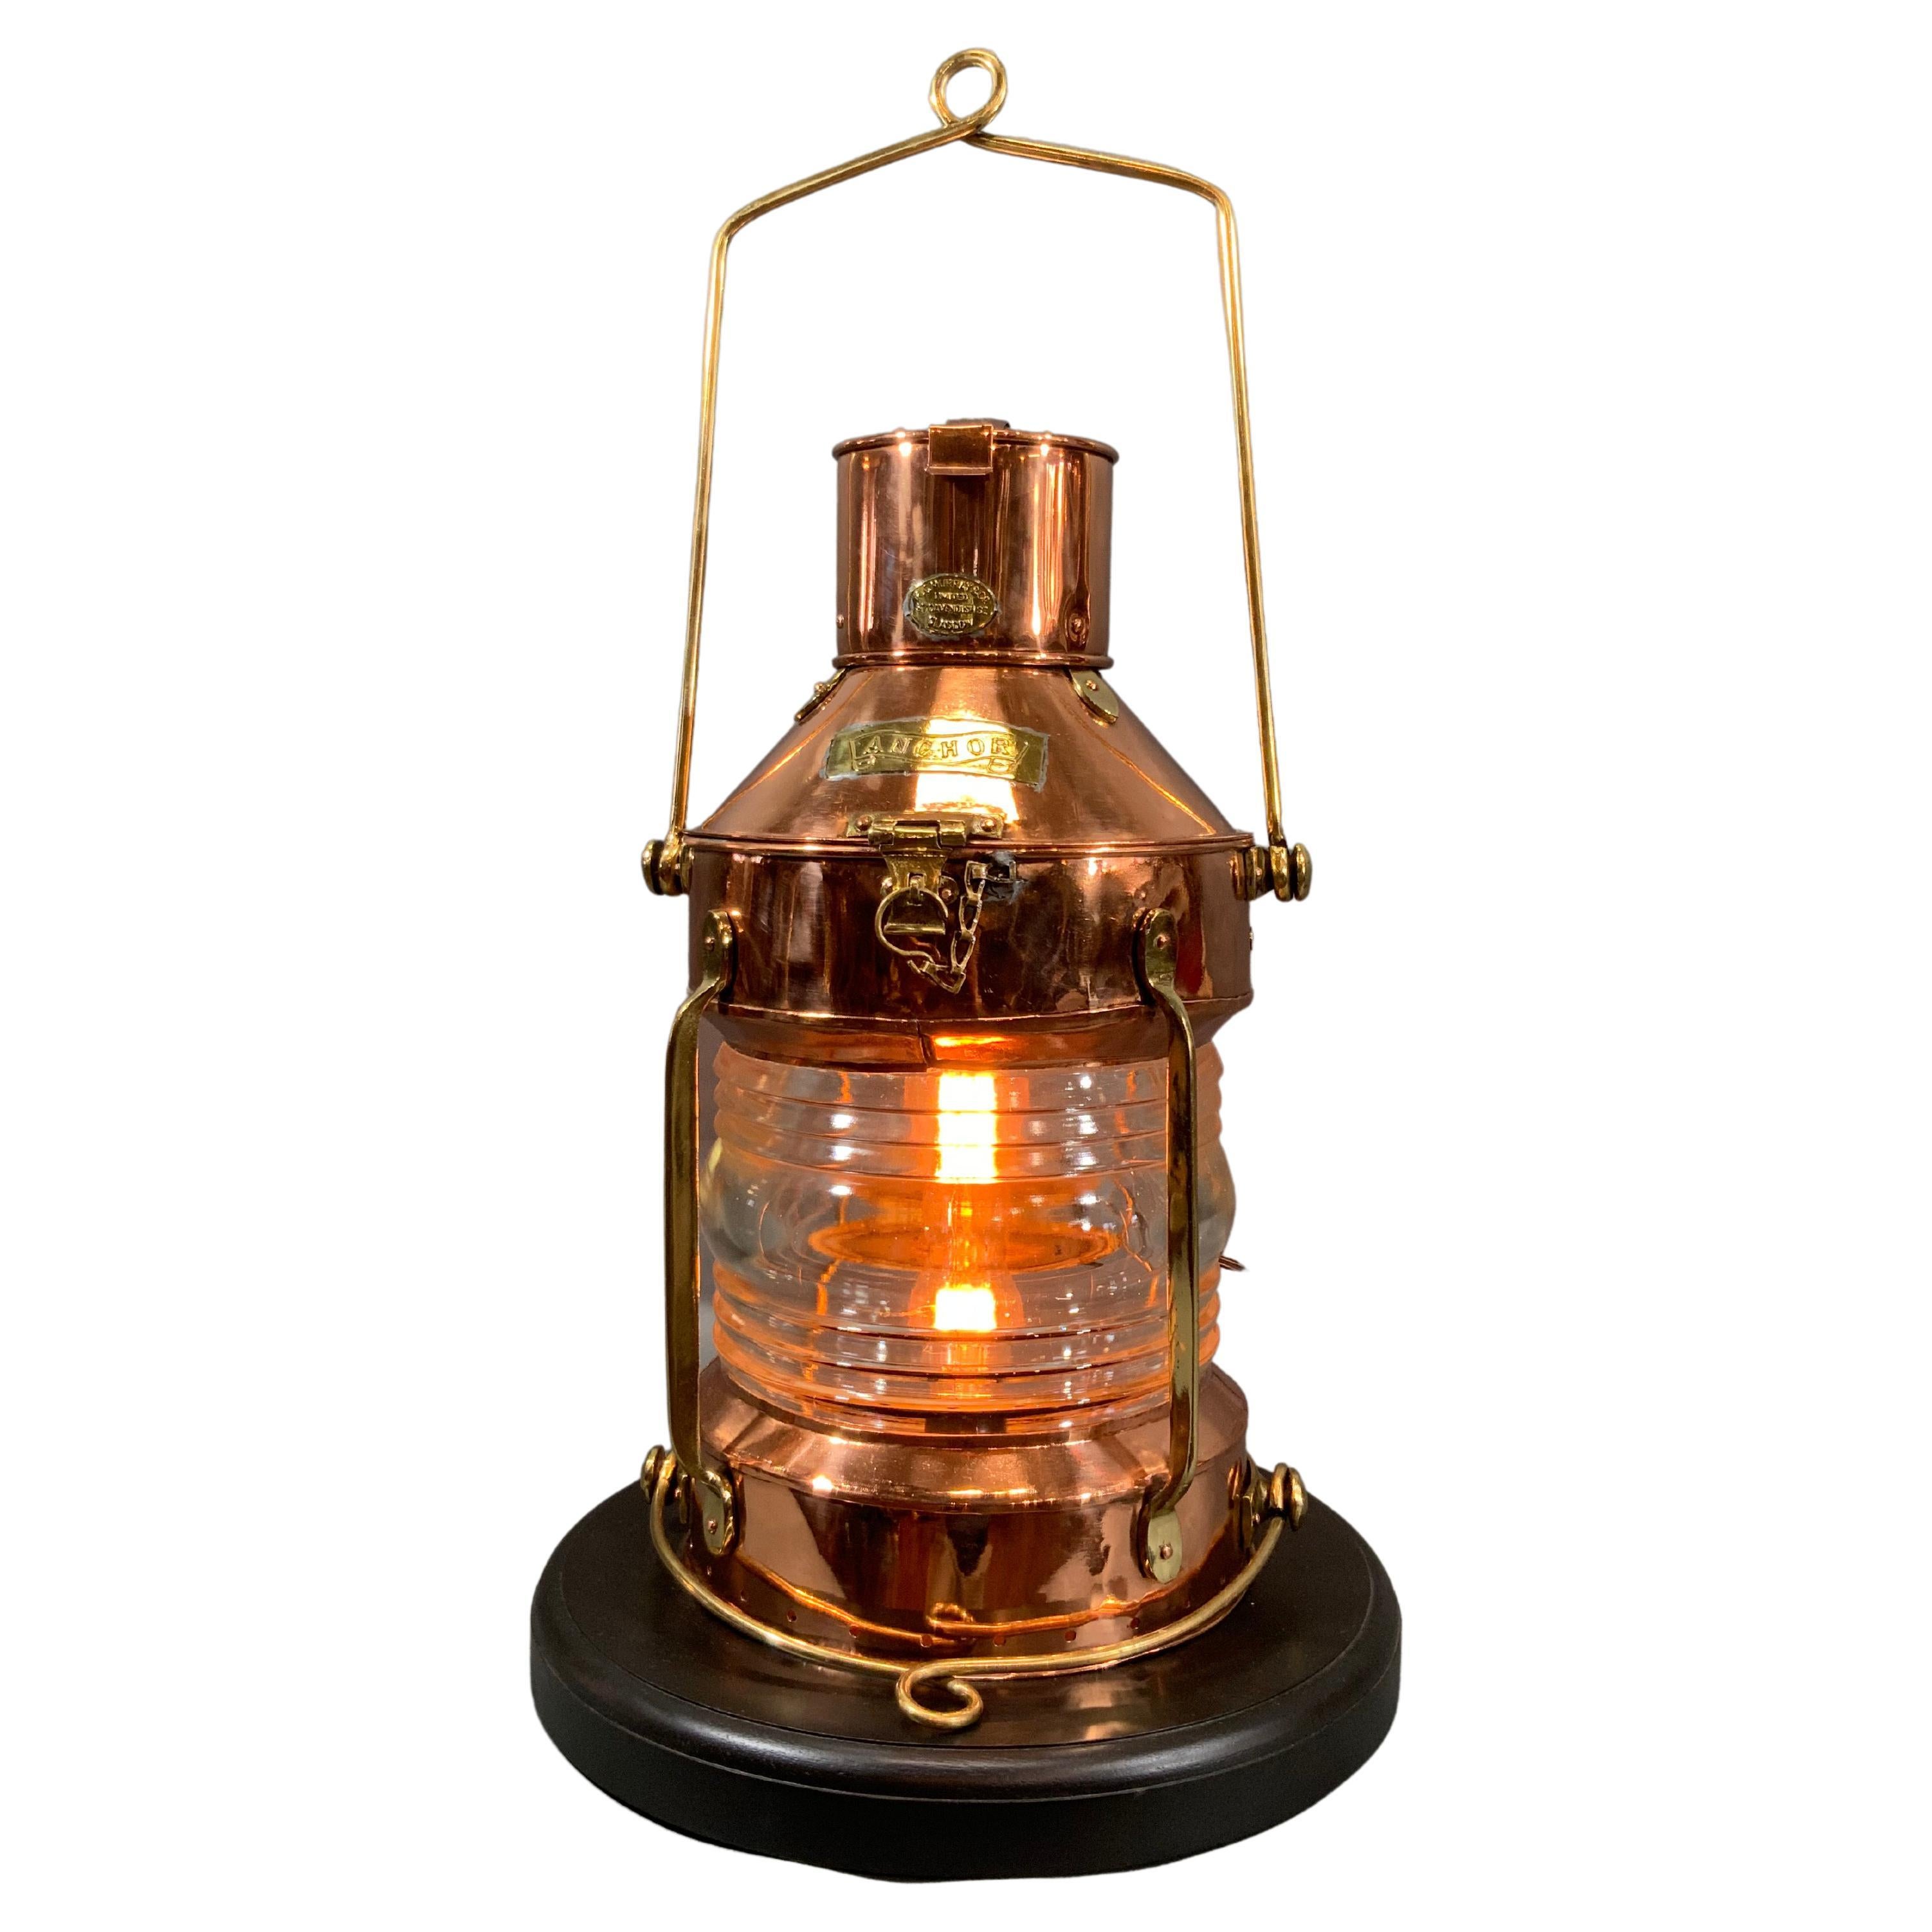 Ship's Anchor Lantern of Copper and Brass with Fresnel Glass Lens by R.C. Murray For Sale